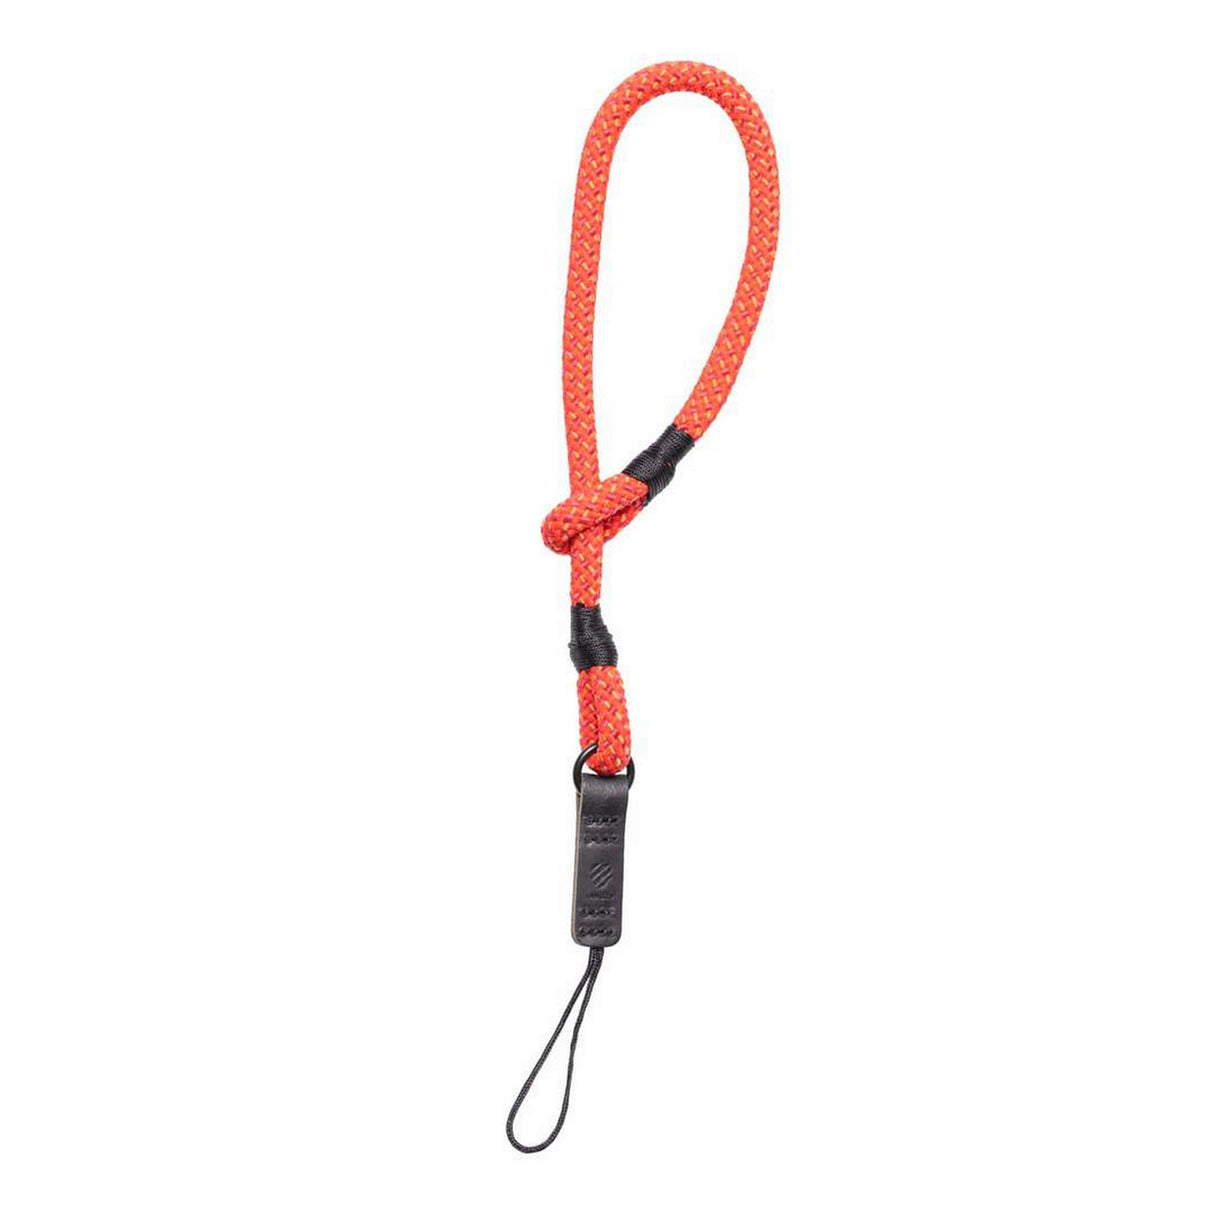 Langly Camera and Phone Wrist Strap, Red